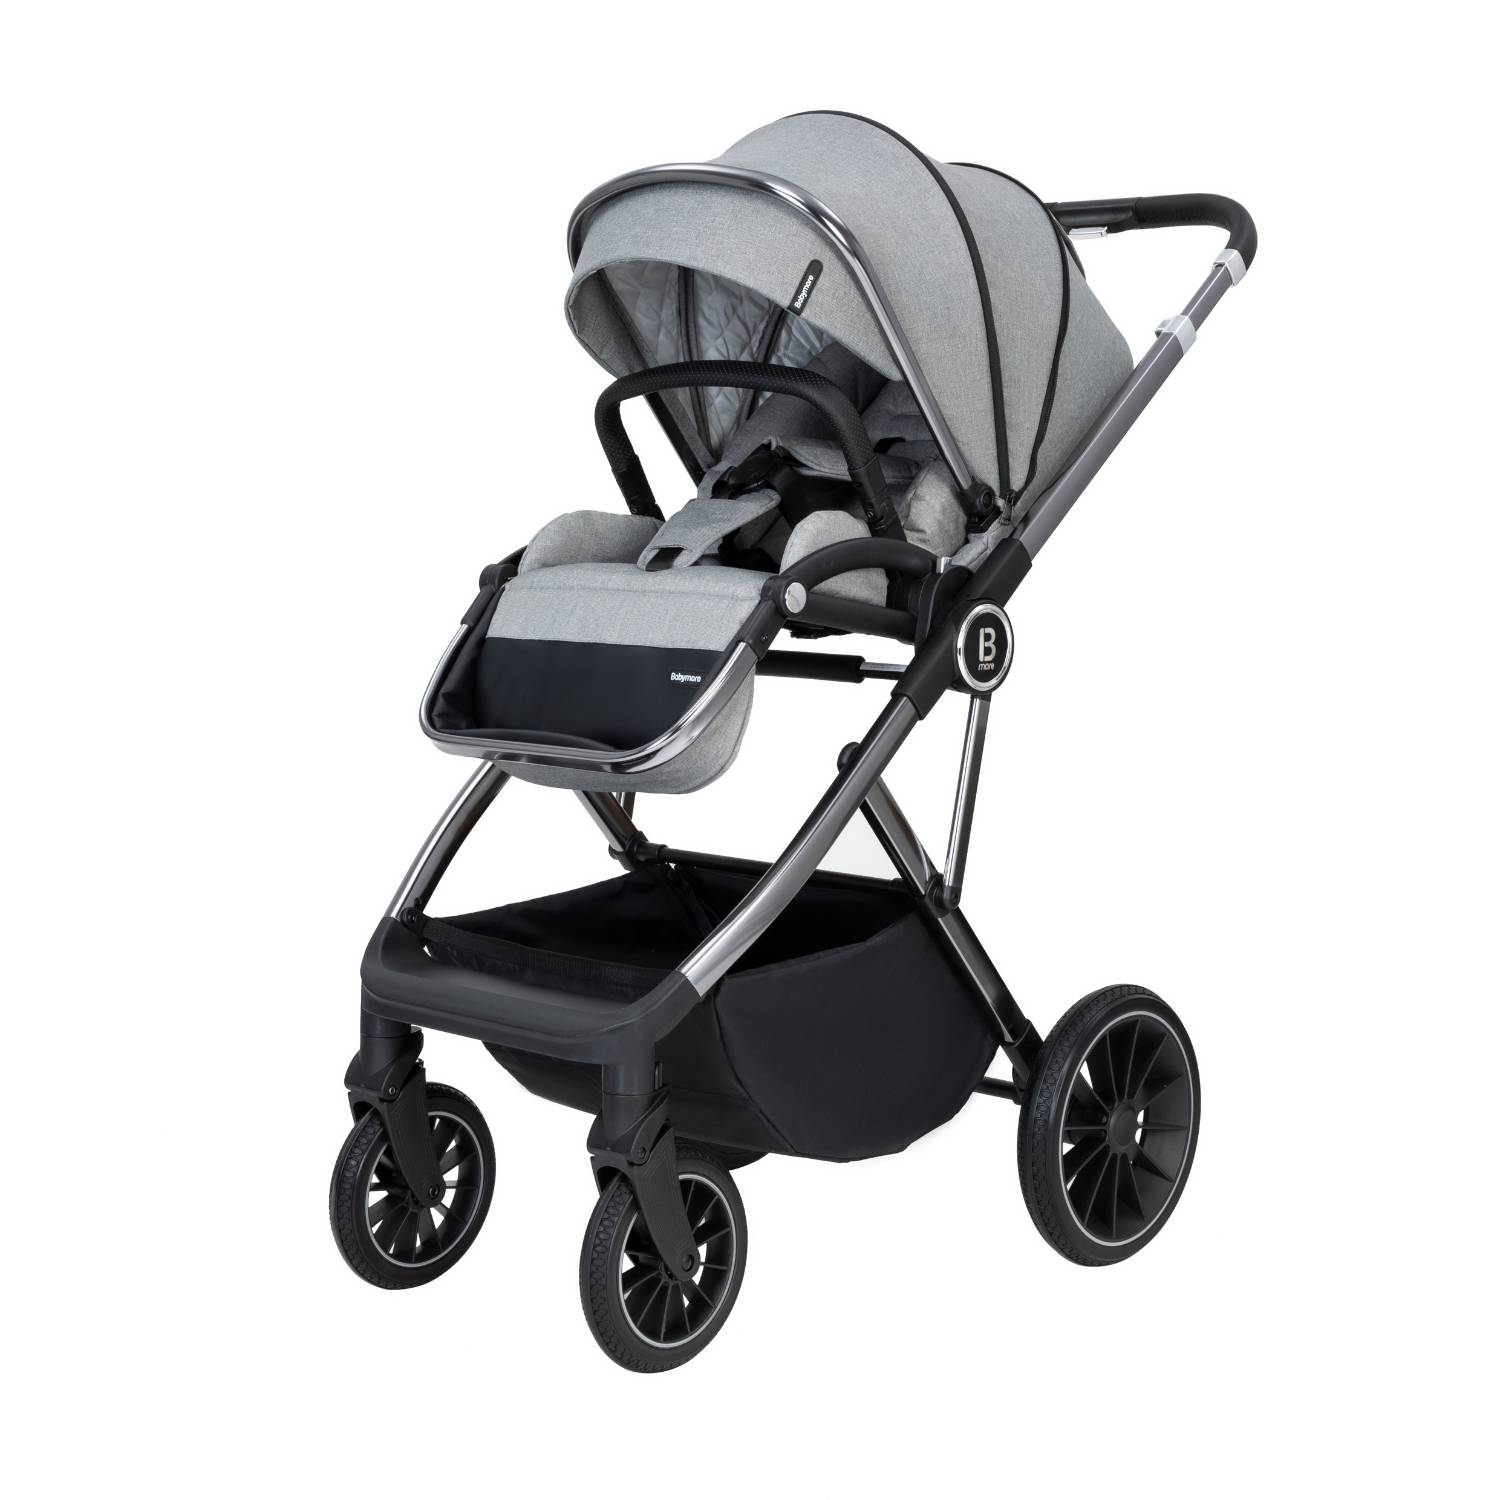 Babymore Chia with Seat Unit in Pearl Grey colour